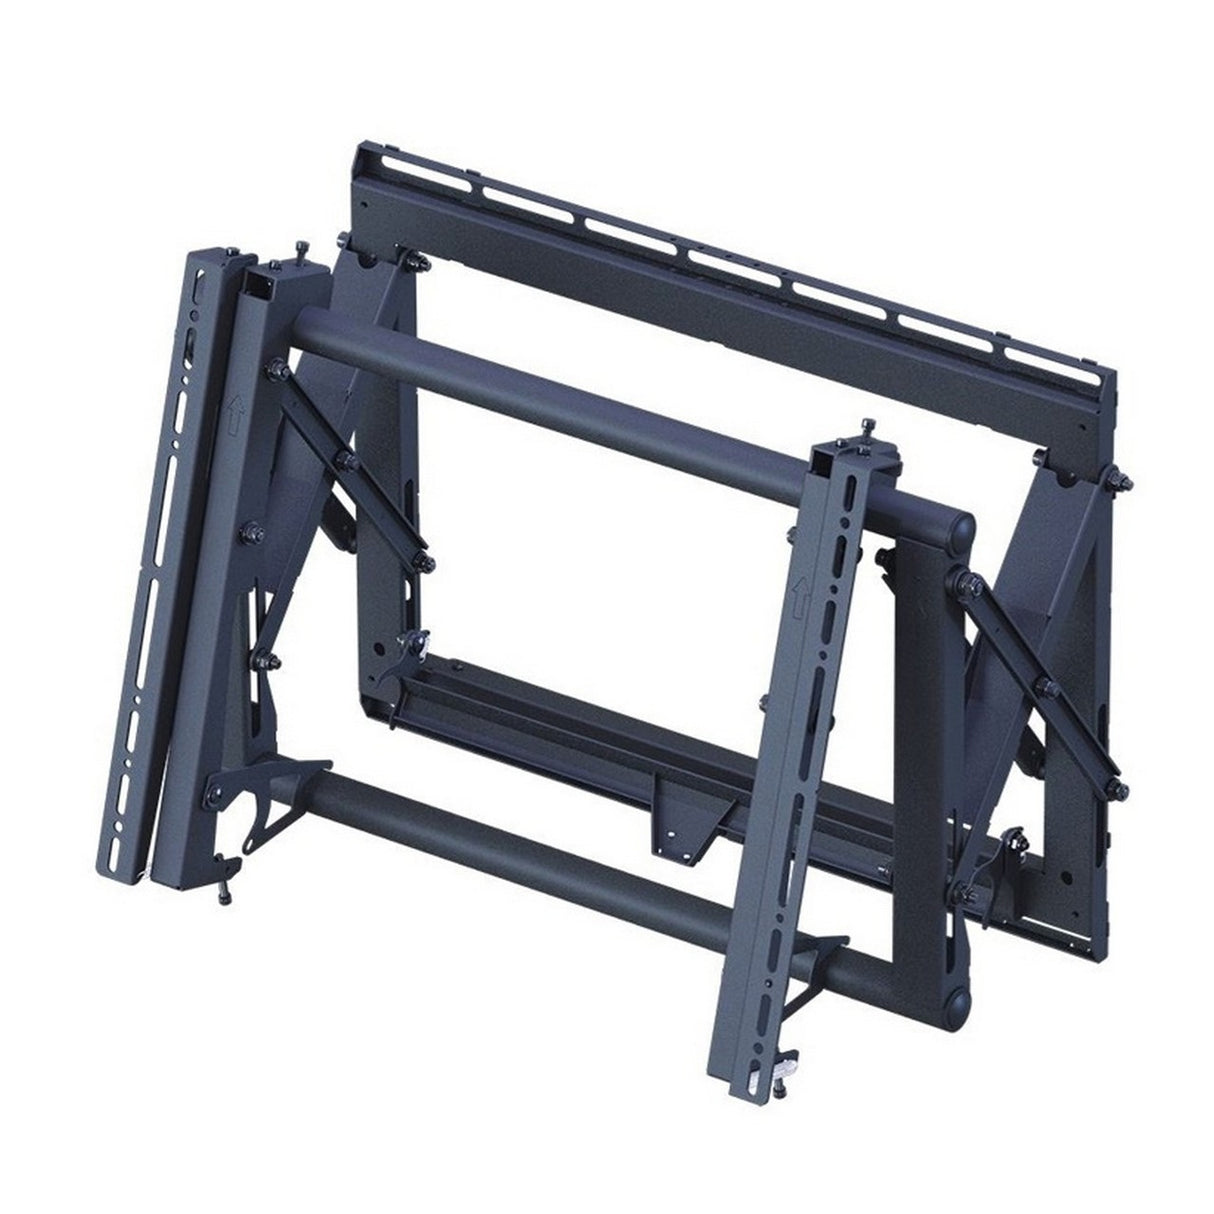 Premier Mounts LMV | 160 Pound Press and Release Pop Out Display Mount